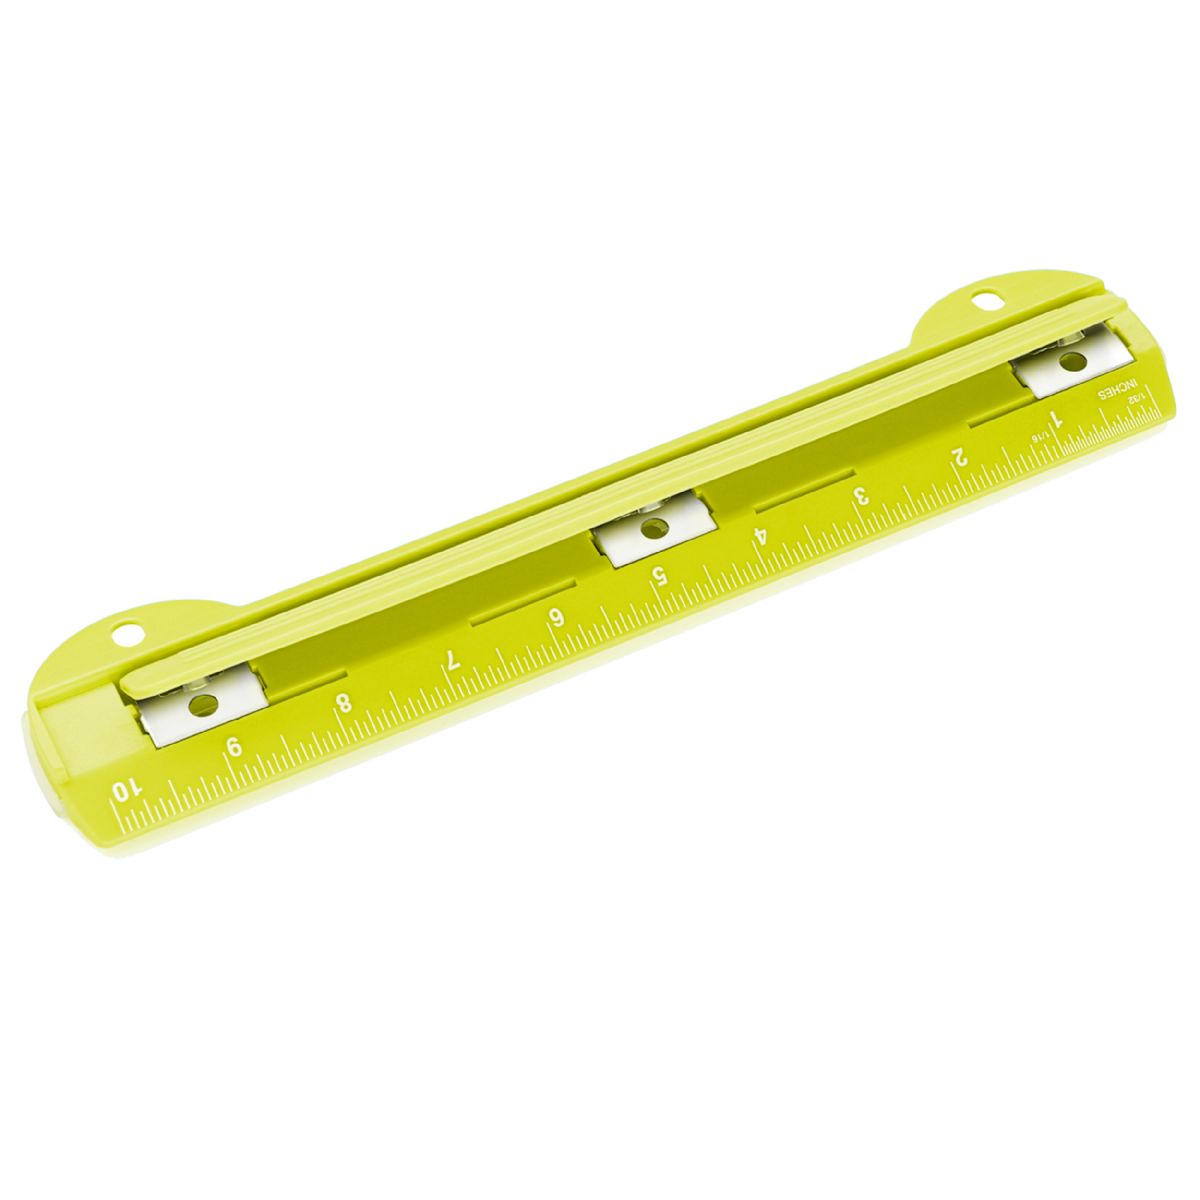 12 Pieces of Portable 3-Hole Paper Punch, Green